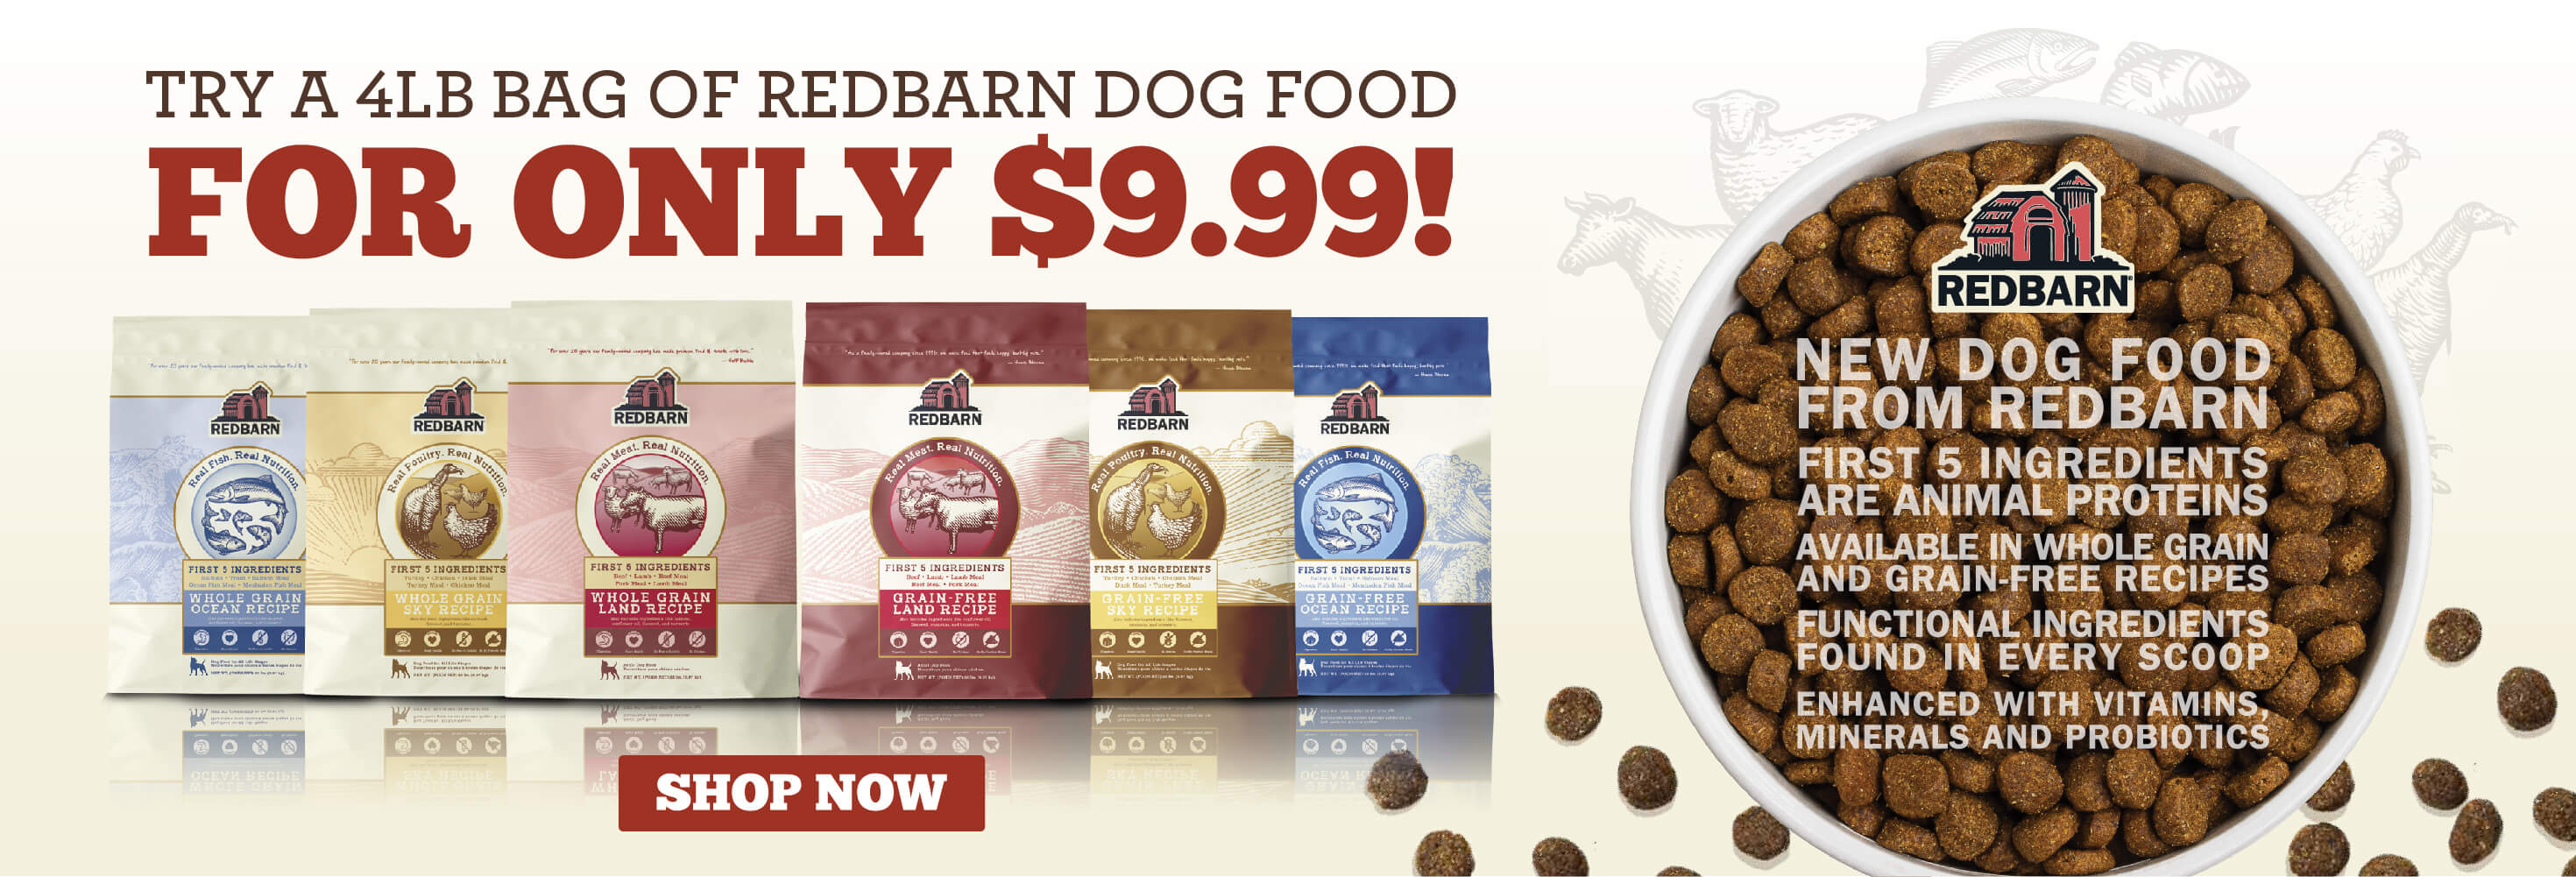 Try A 4LB Bag of Redbarn Dog Food For Only Dollar 9.99